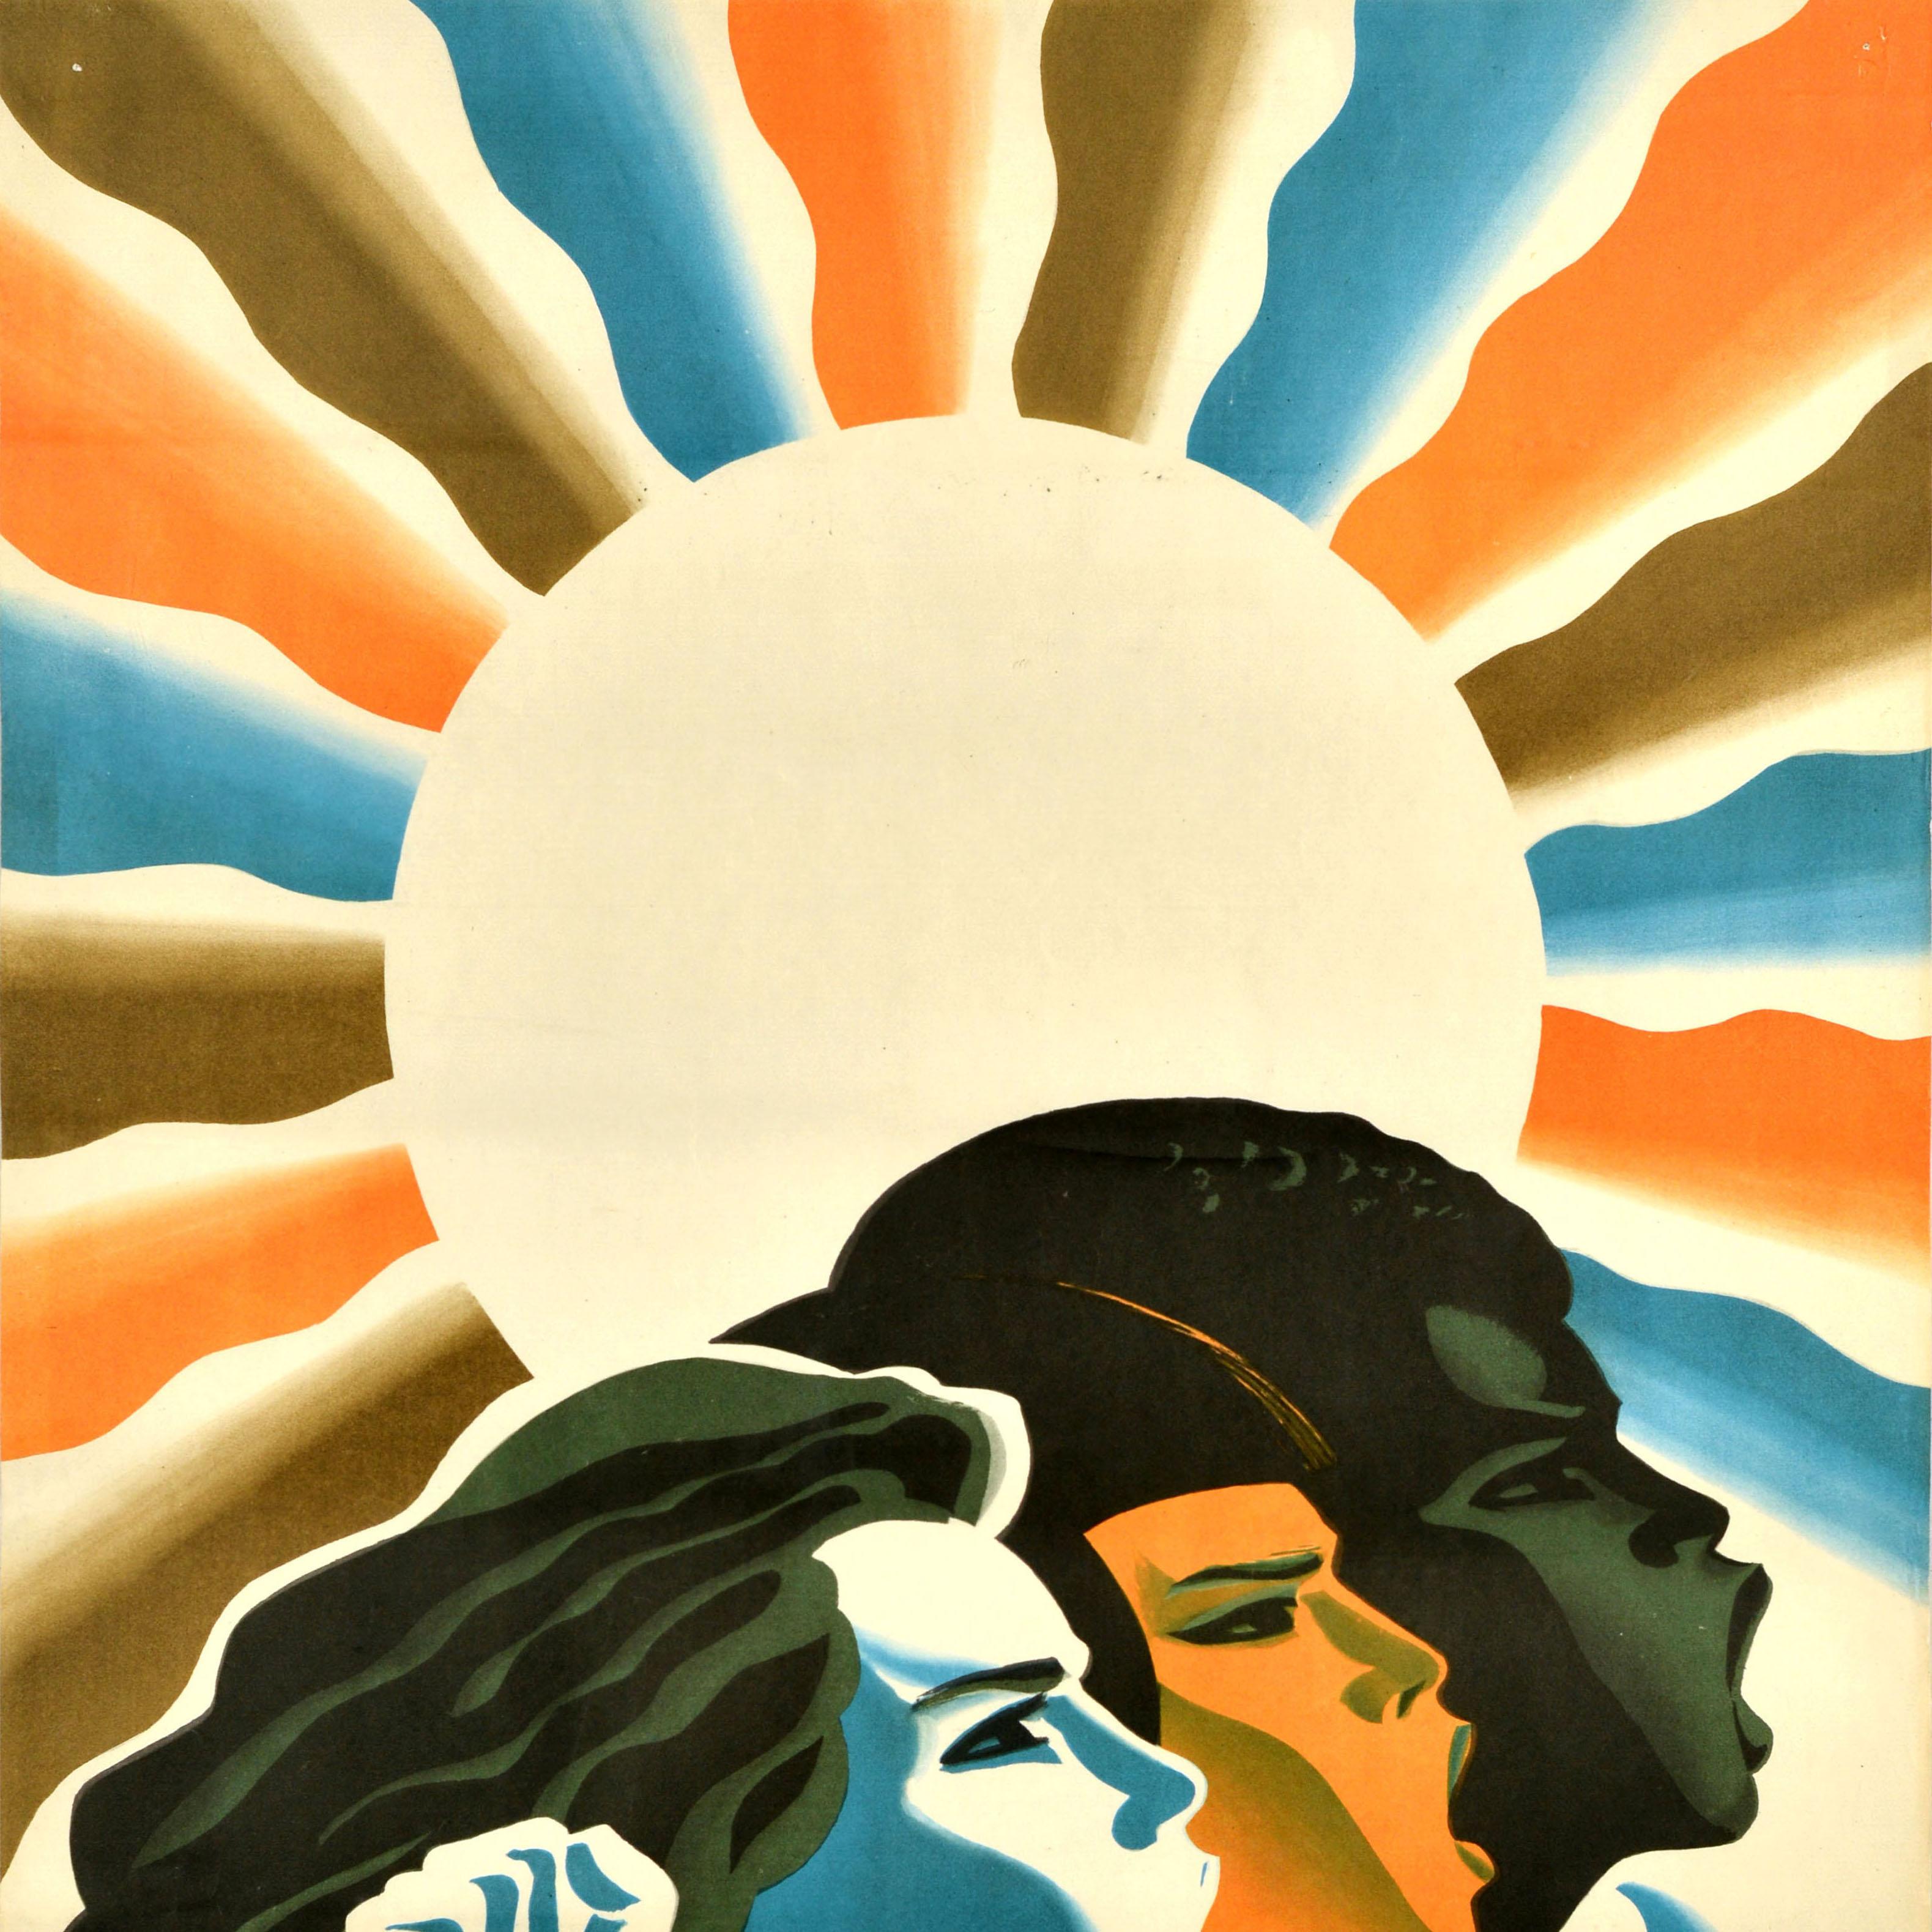 Original vintage Soviet propaganda poster - For the solidarity of women of the world / За солидарность женщин мира! - featuring an image of three ladies representing different countries shouting for women's rights and equality in front of the sun